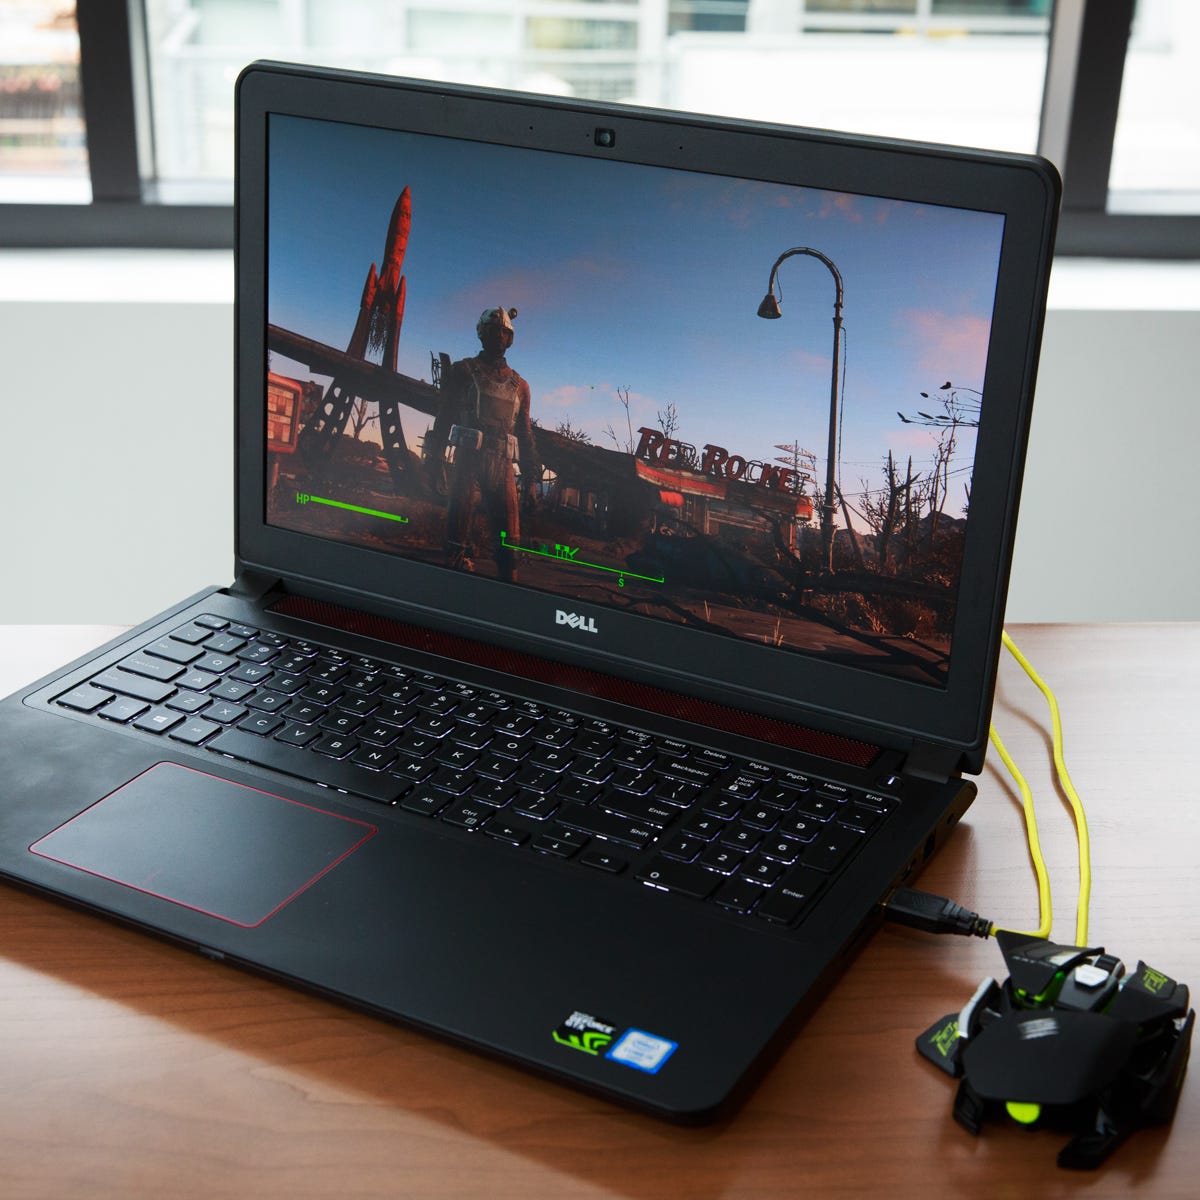 Dell Inspiron 15 7000 (2016) review: This $800 laptop can play any